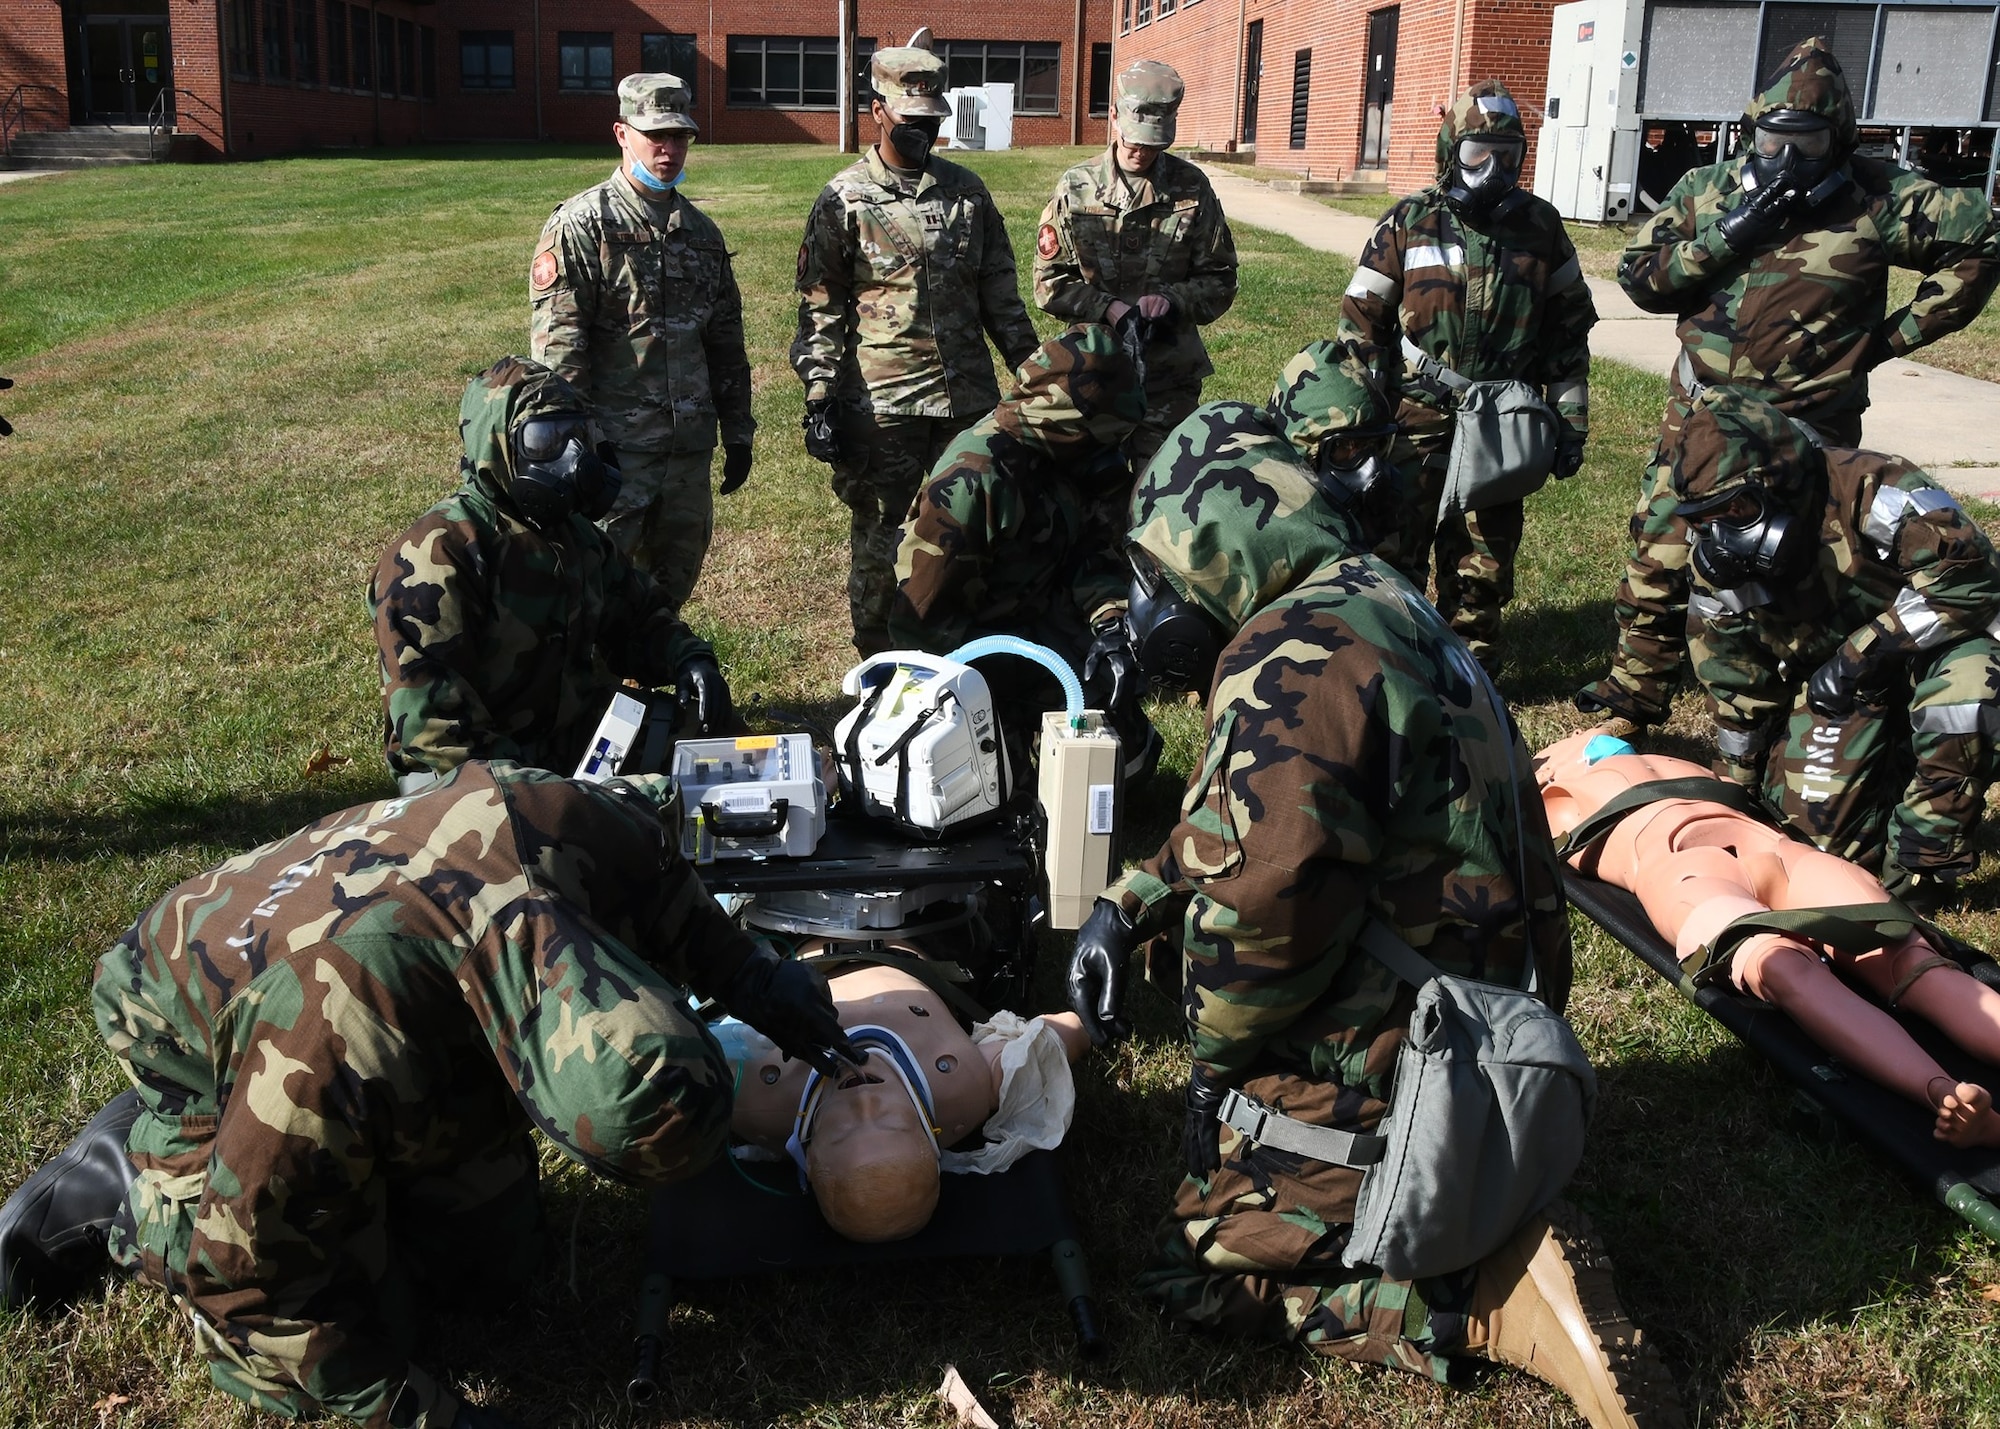 Members of the 459th Aeromedical Staging Squadron practice en route patient staging system training Nov. 7, 2021, at Joint Base Andrews, Md. The training is held periodically to ensure mission readiness. (U.S. Air Force photo by Staff Sgt. Cierra Presentado)